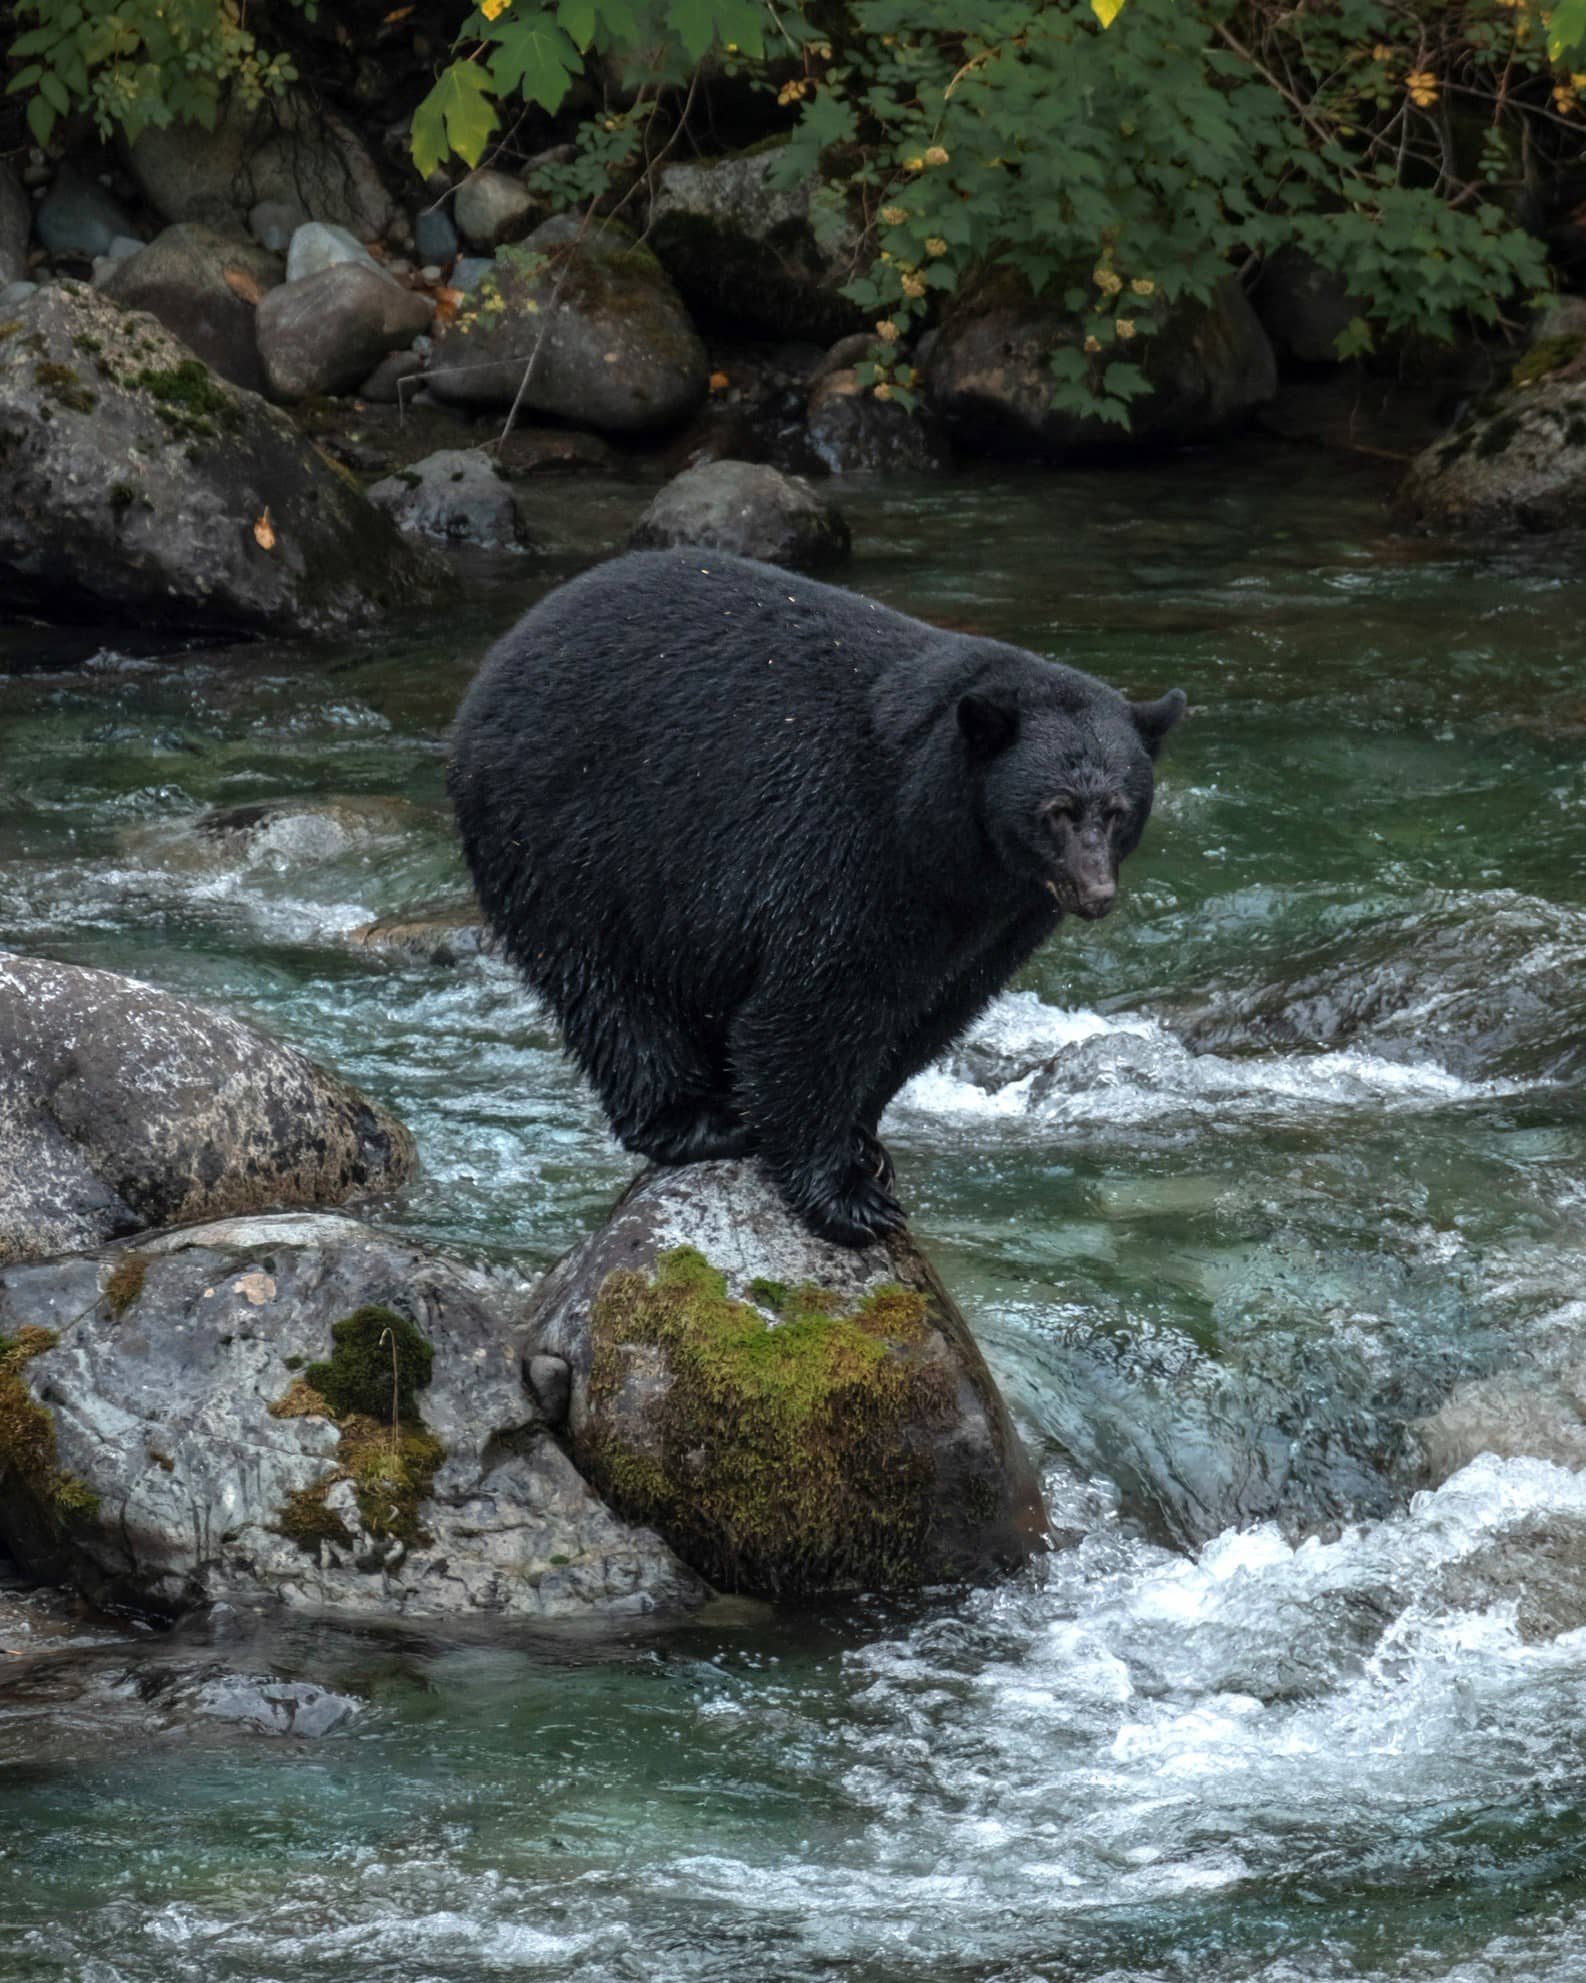 A black bear perched on a rock in a river.